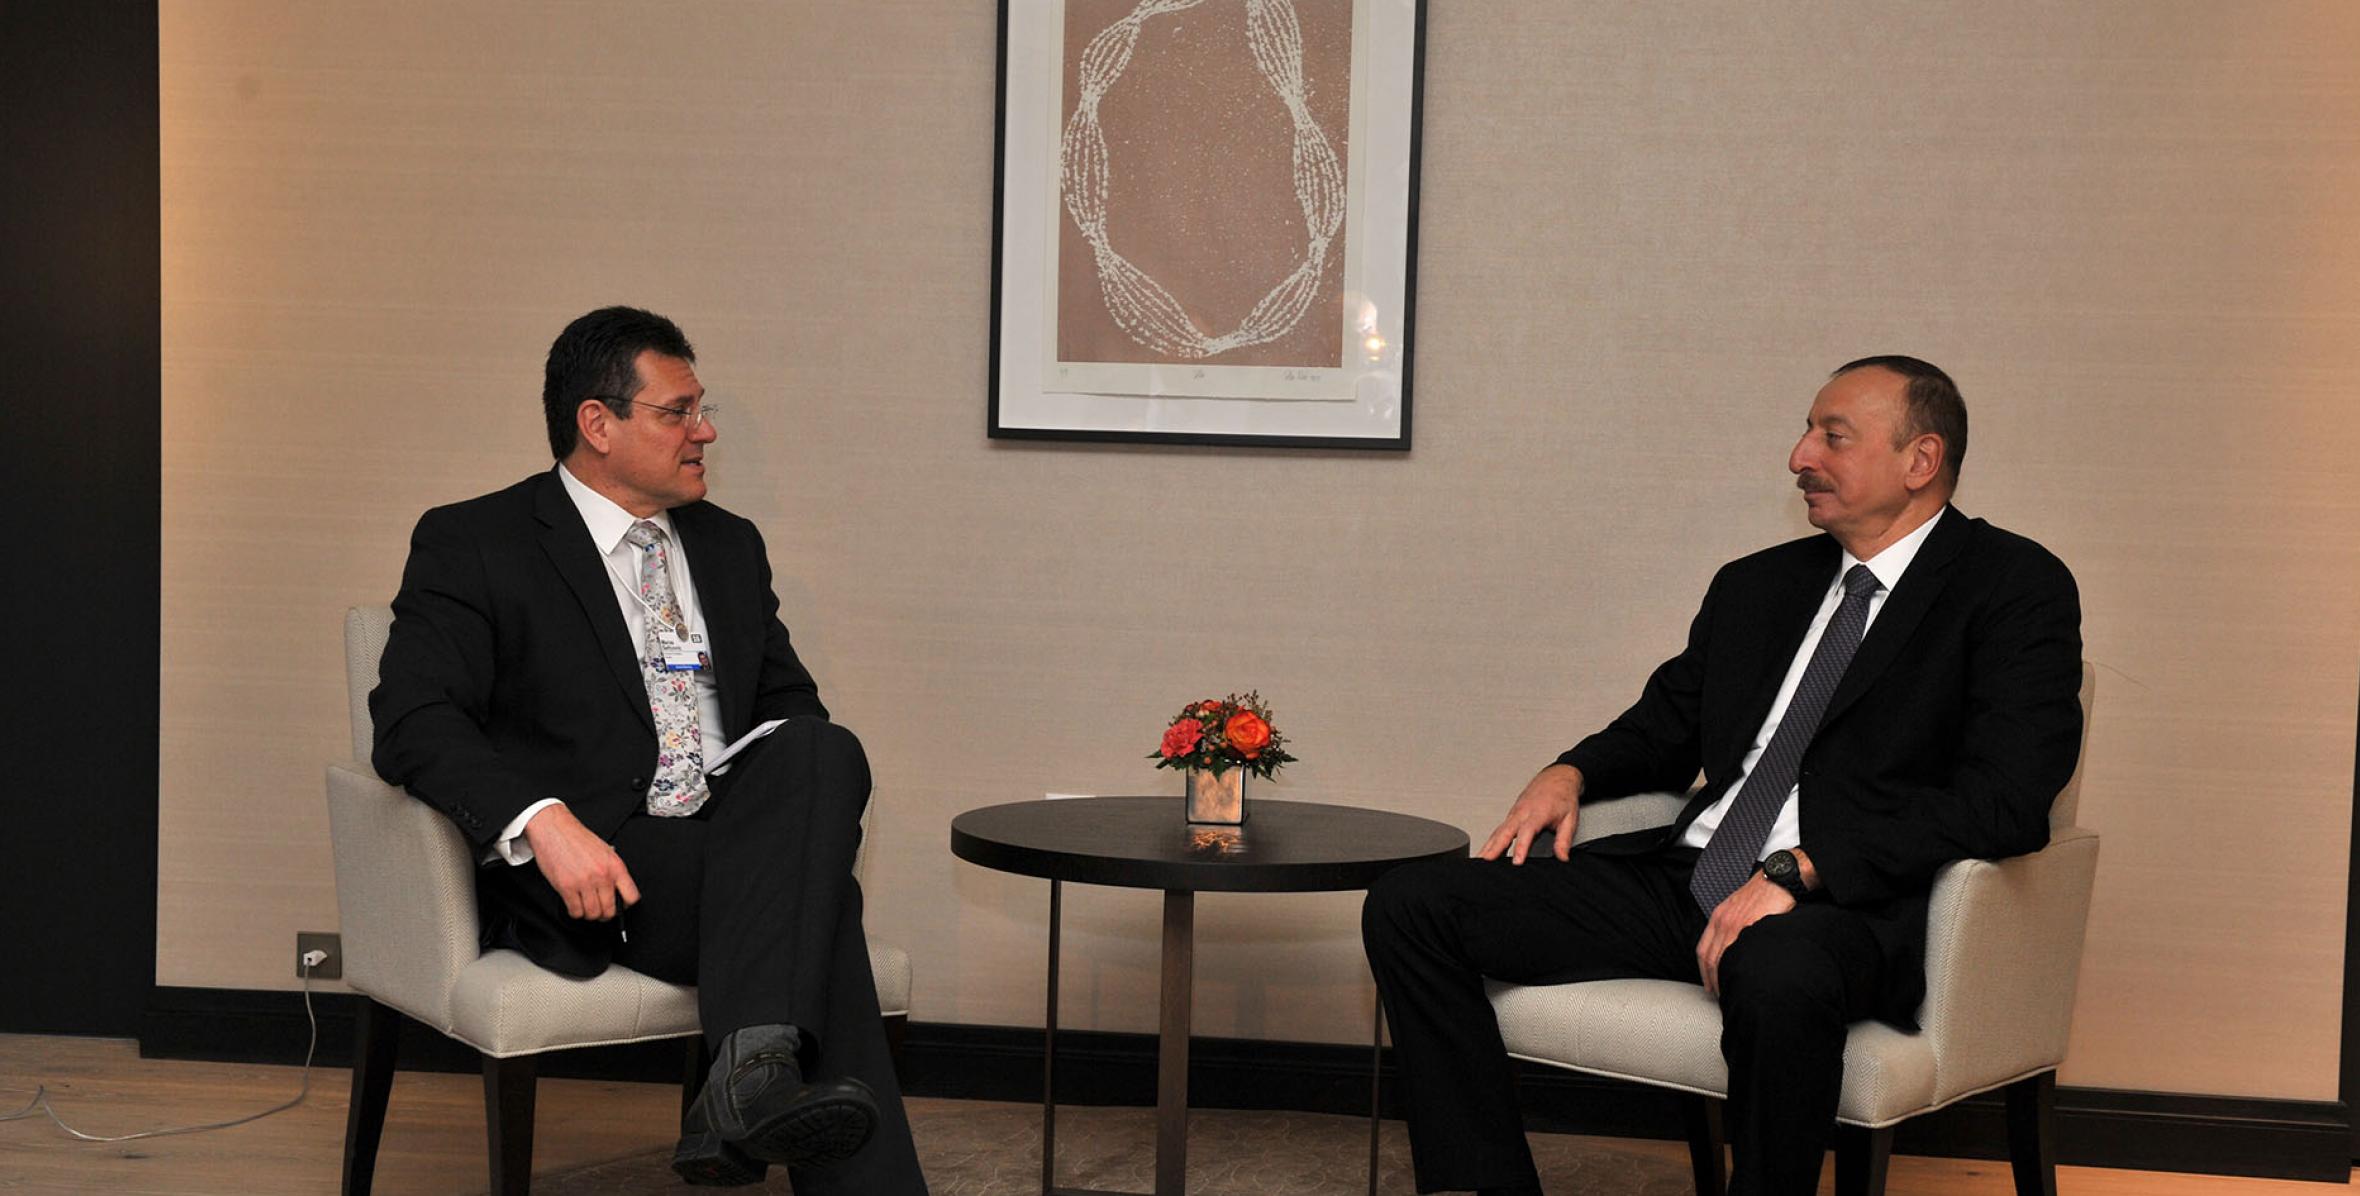 Ilham Aliyev met with the European Commission Vice-President for Energy Union